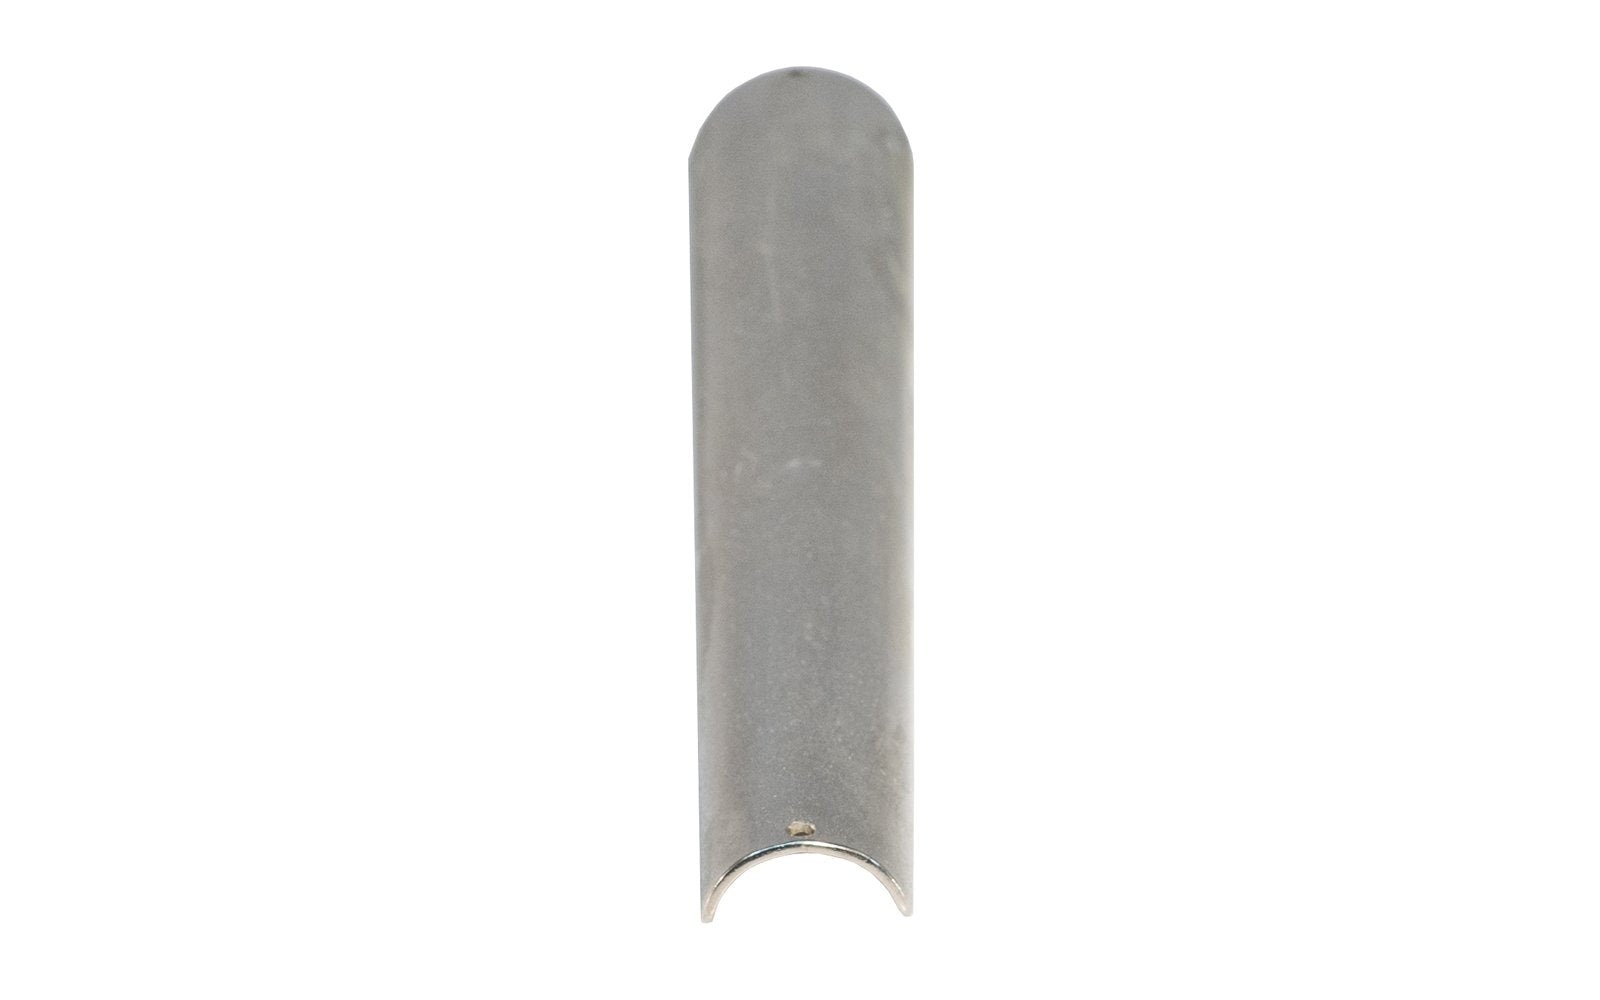 DMT Diamond Large Honing Cone ~ Fine - DCLF - Made in USA ~ Excellent for working gouges, wood turning, tool & die work -Diamond Honing Tapered Cone - Large Size - Blade width tapers from the base 3/4" to 1-1/4" diameter - Half Round 